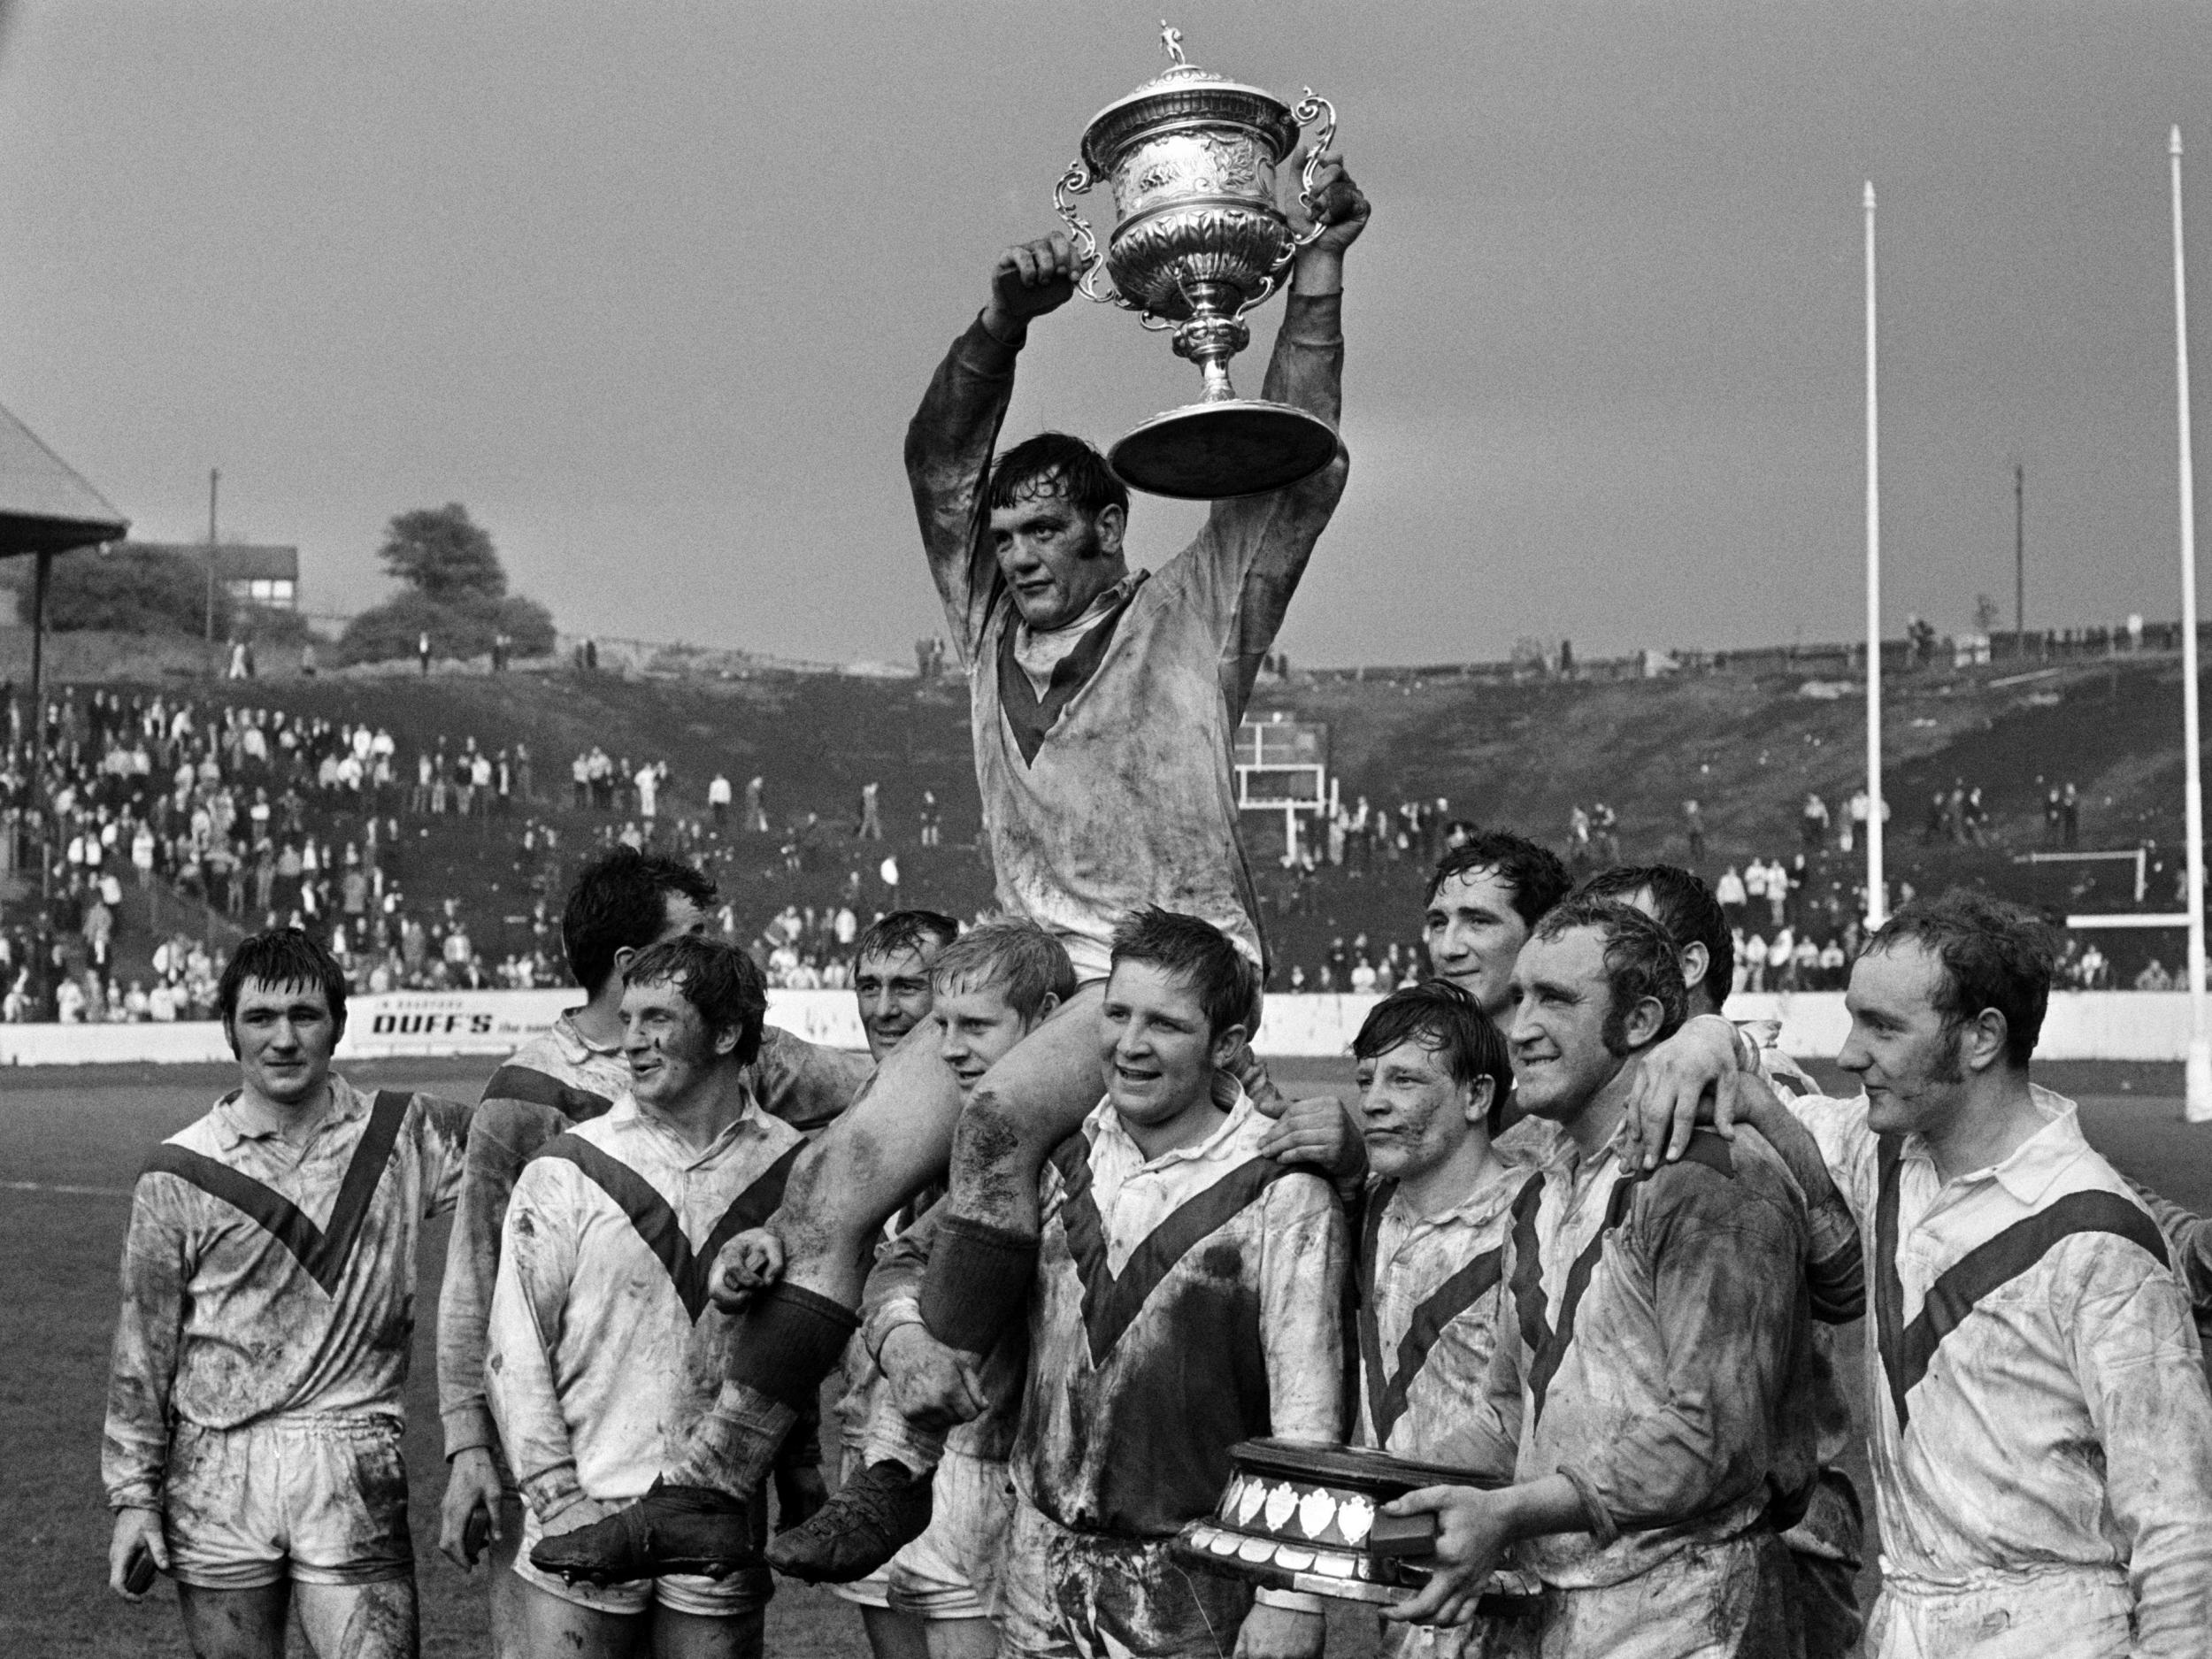 Watson is carried by his St Helens teammates after their Rugby League Championship play-off Final victory over Leeds in 1970